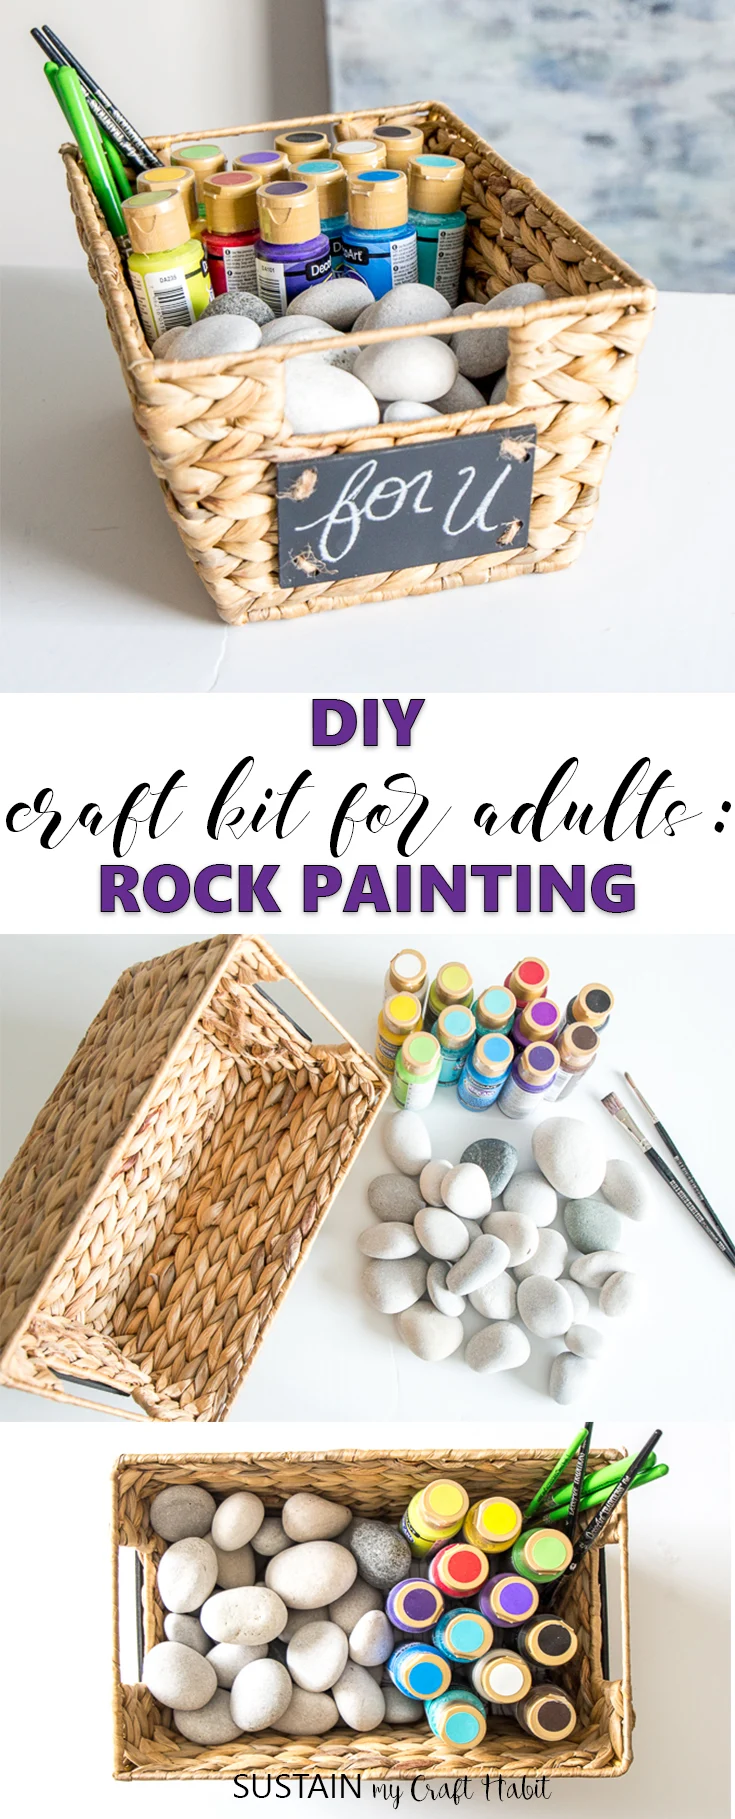 Collage of images for how to assemble your own rock painting kit